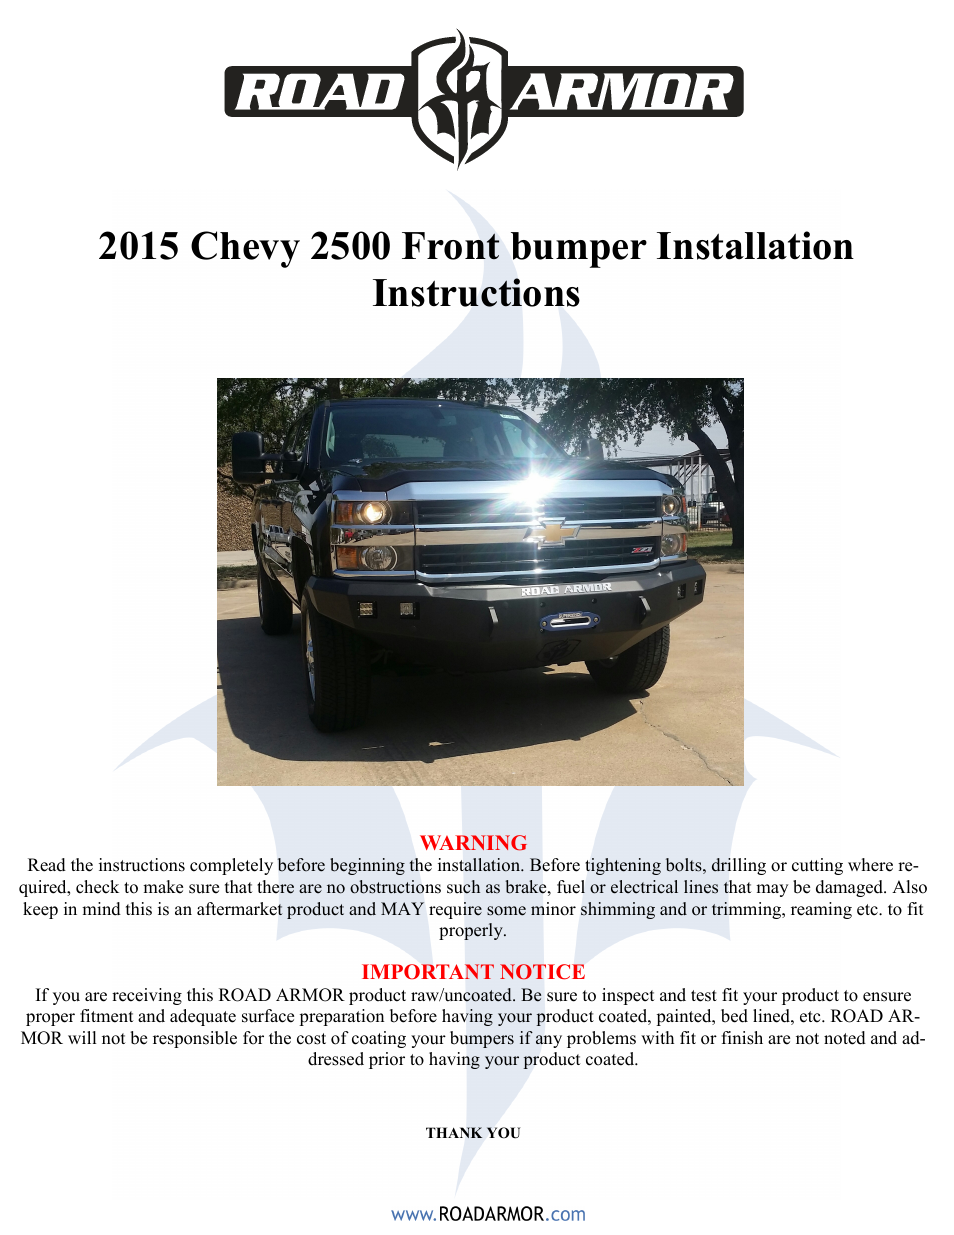 2015 Chevy 2500 Front Bumper